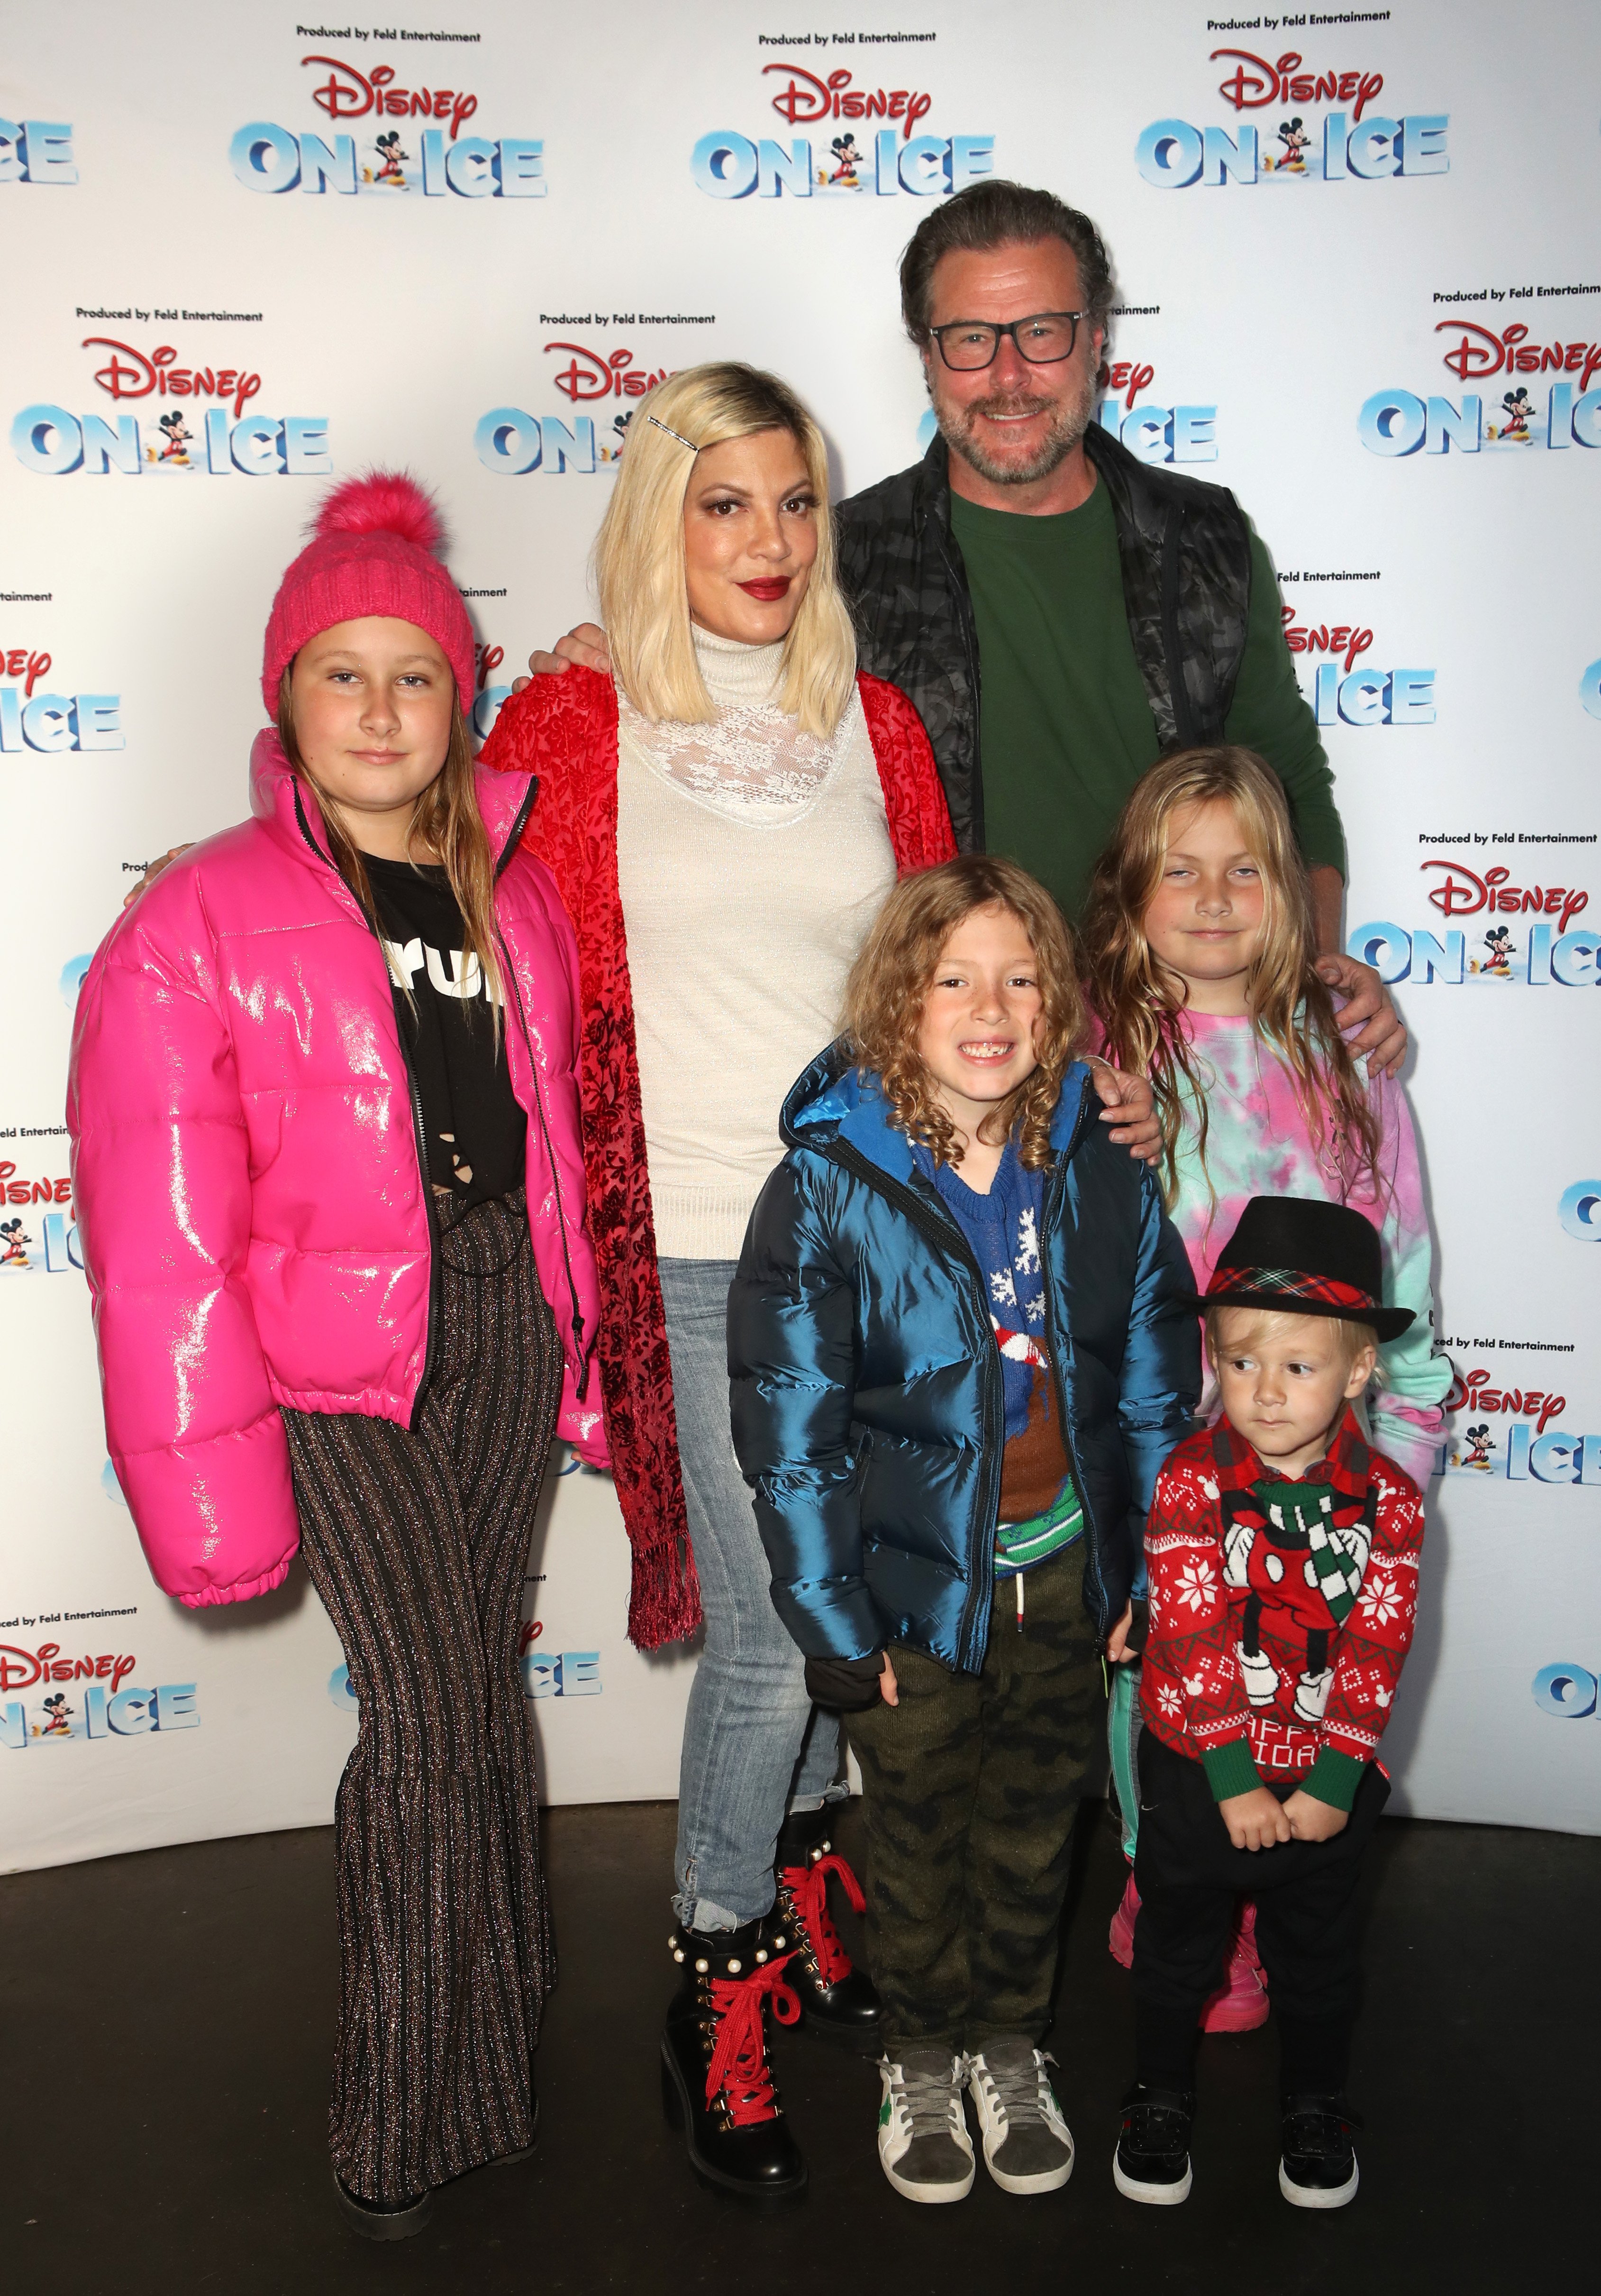 Tori Spelling and Dean McDermott with children Stella, Hattie Liam and attends Disney On Ice Presents Mickey's Search Party Holiday Celebrity Skating Event at Staples Center on December 13, 2019 in Los Angeles, California. | Source: Getty Images